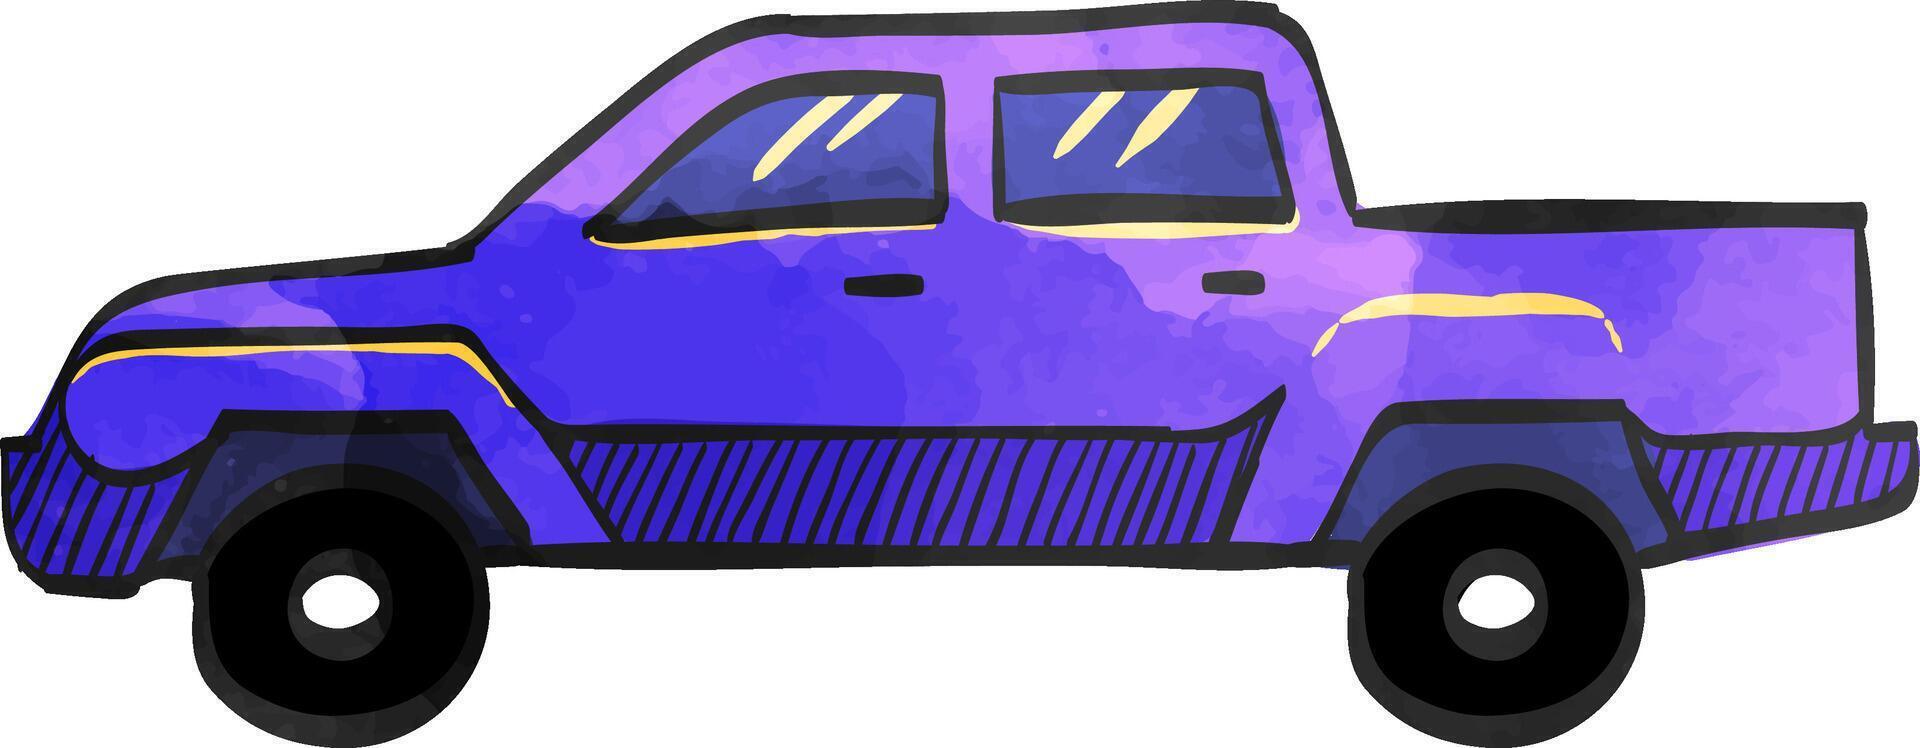 Car icon in color drawing. Truck, double cabin, 4x4, 4 wheel driver American vector